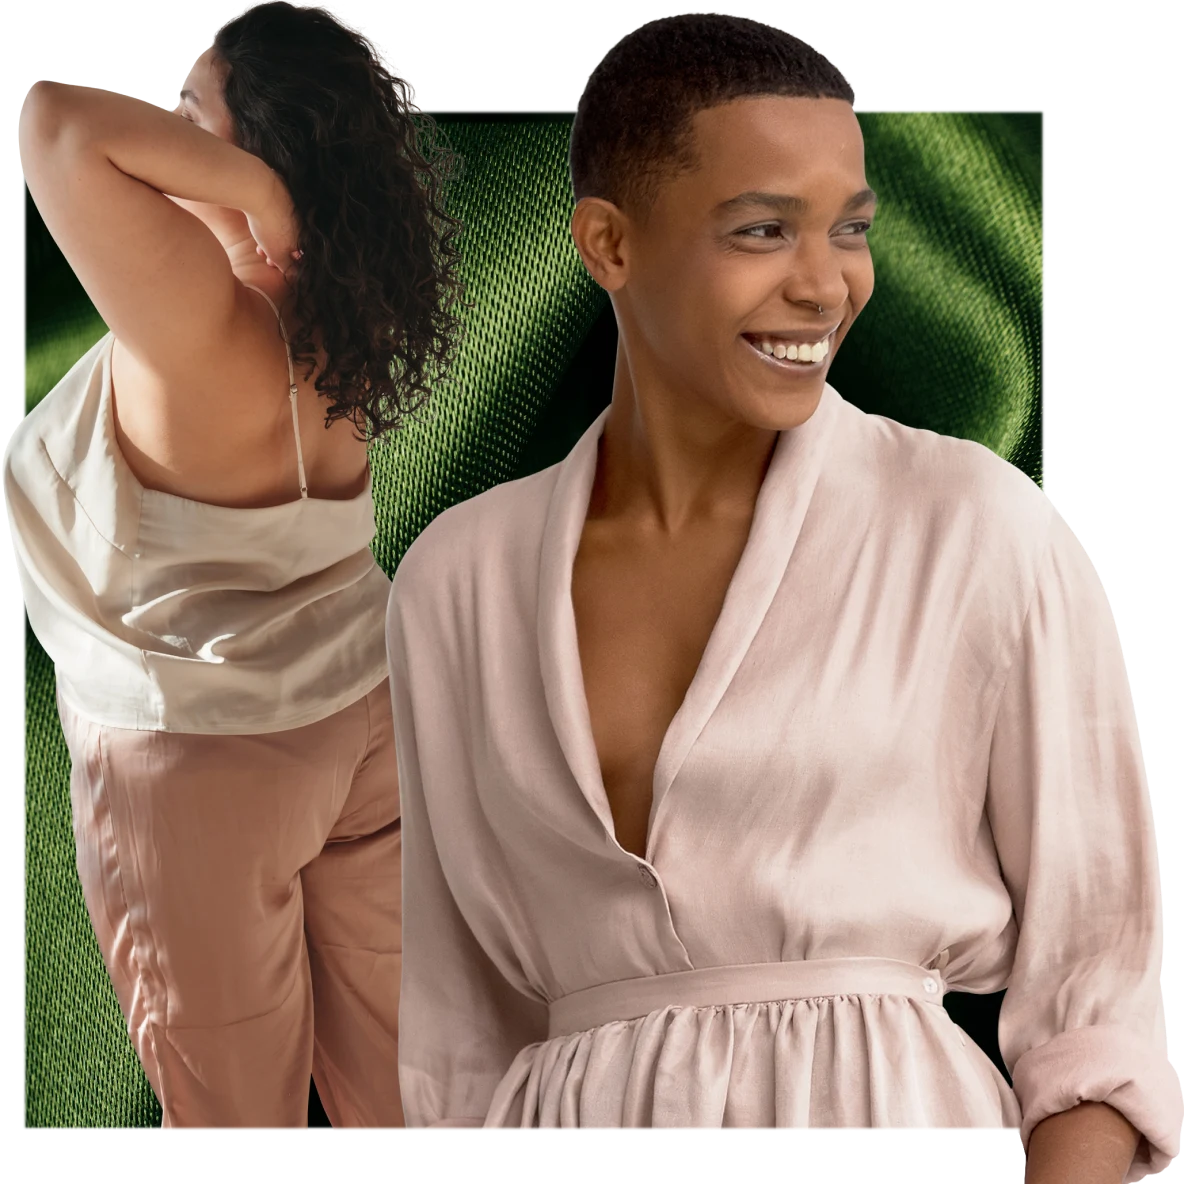 Two Black women, one with short hair and one with long hair, are wearing pink nightclothes and standing in front of a green linen backdrop.